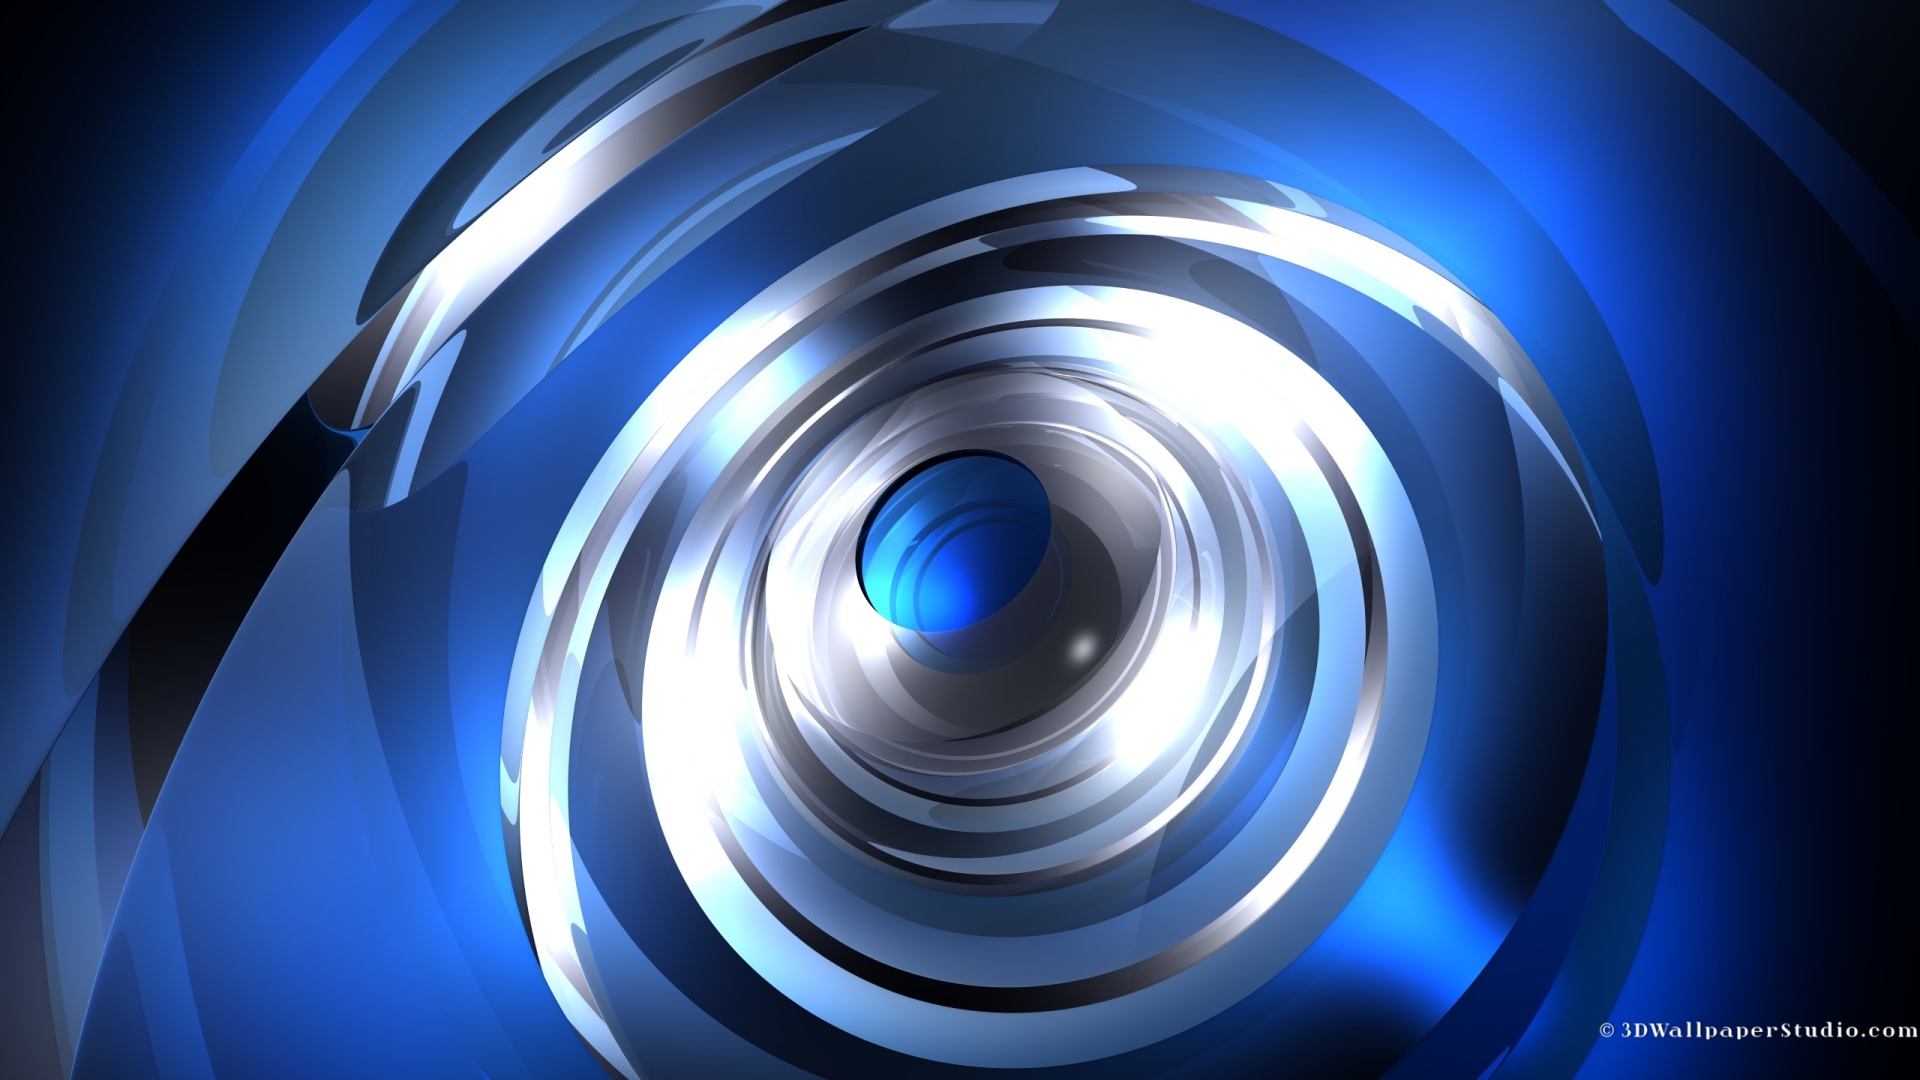 Free Download 3d Wallpaper Moving Blue 3d Abstract 19 X 1080 19x1080 For Your Desktop Mobile Tablet Explore 48 Cool Wallpaper 3d Moving 3d Moving Wallpapers Free Free Moving